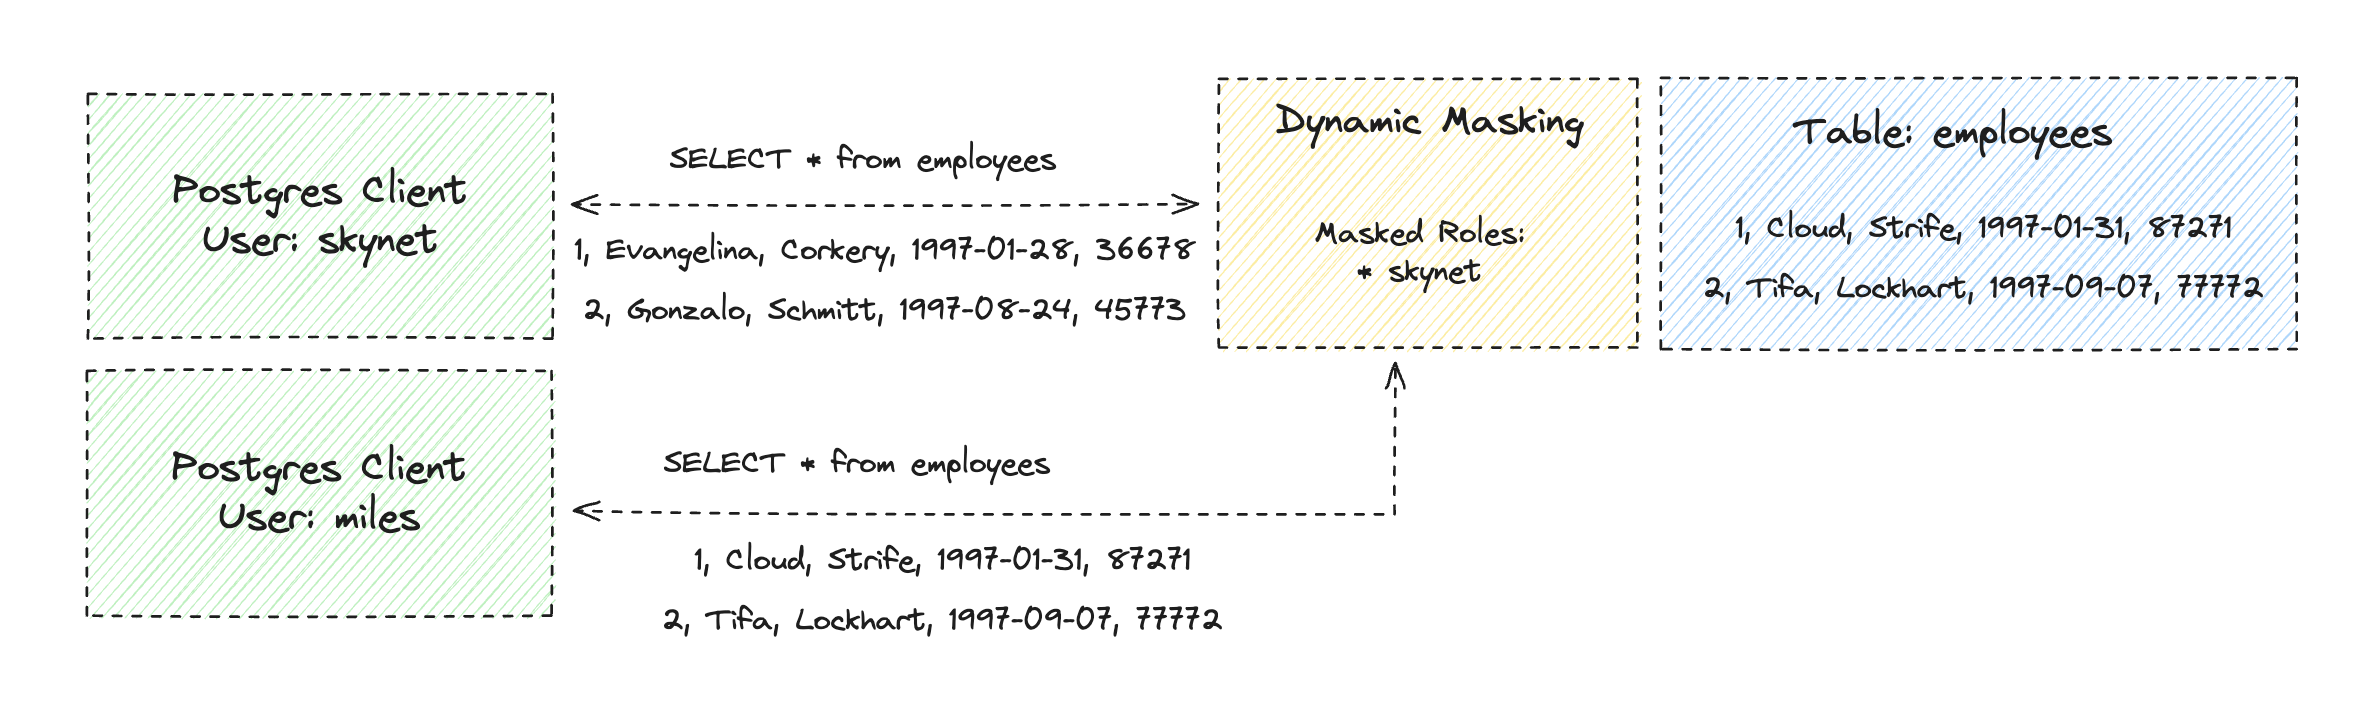 An illustration that shows two roles reading data from Postgres with dynamic masking enabled. The "skynet" role is marked as masked, and therefore receives masked data. The "miles" role is not marked as masked and therefore receives the original unmasked data.